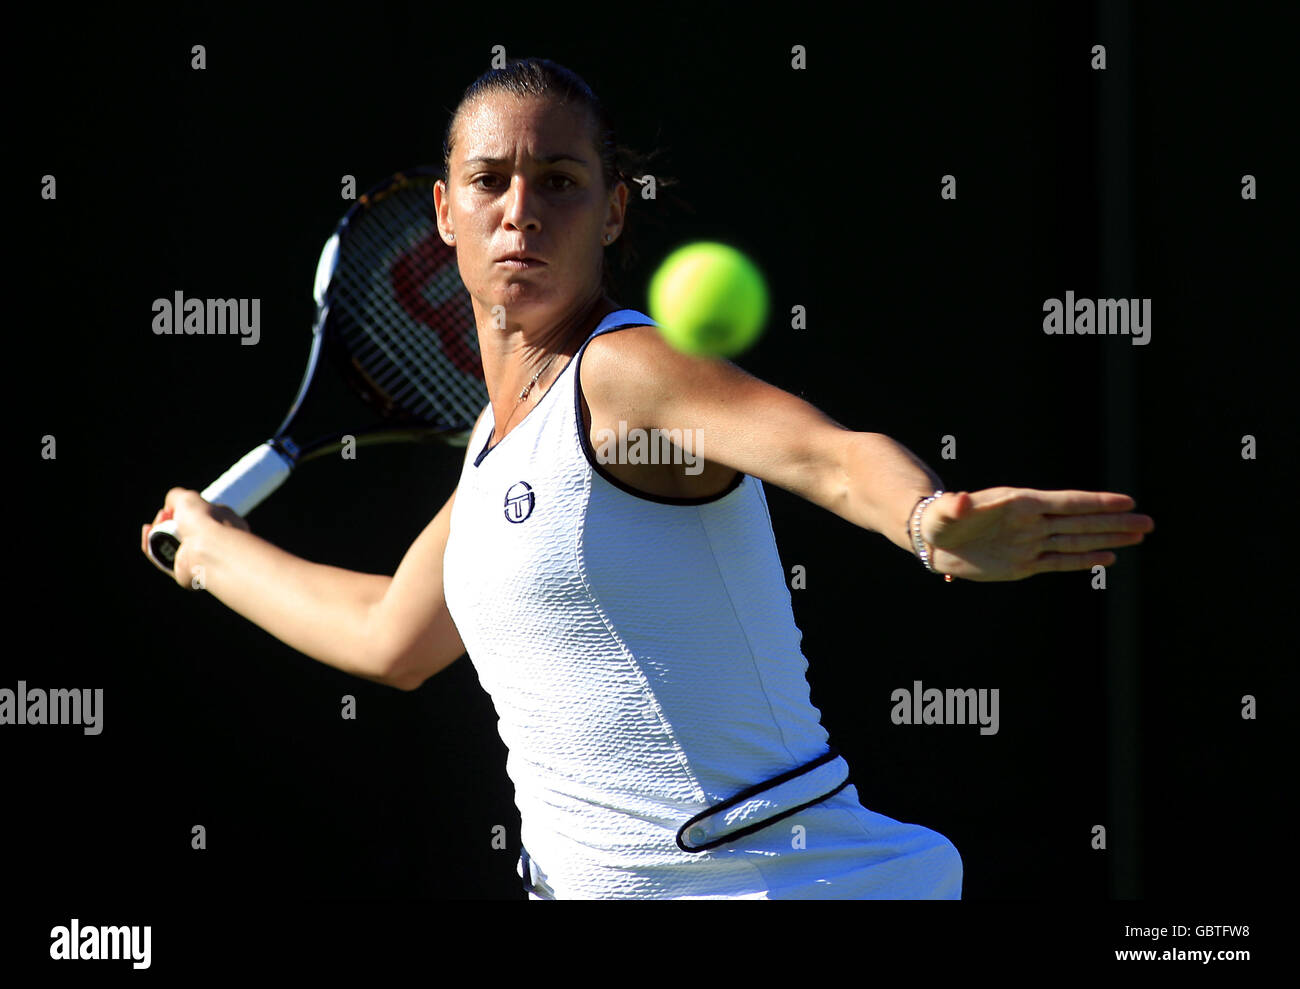 Tennis - 2009 Wimbledon Championships - Day Two - The All England Lawn Tennis and Croquet Club. Italy's Flavia Pennetta in action against Spain's Nuria llagostera Vives Stock Photo